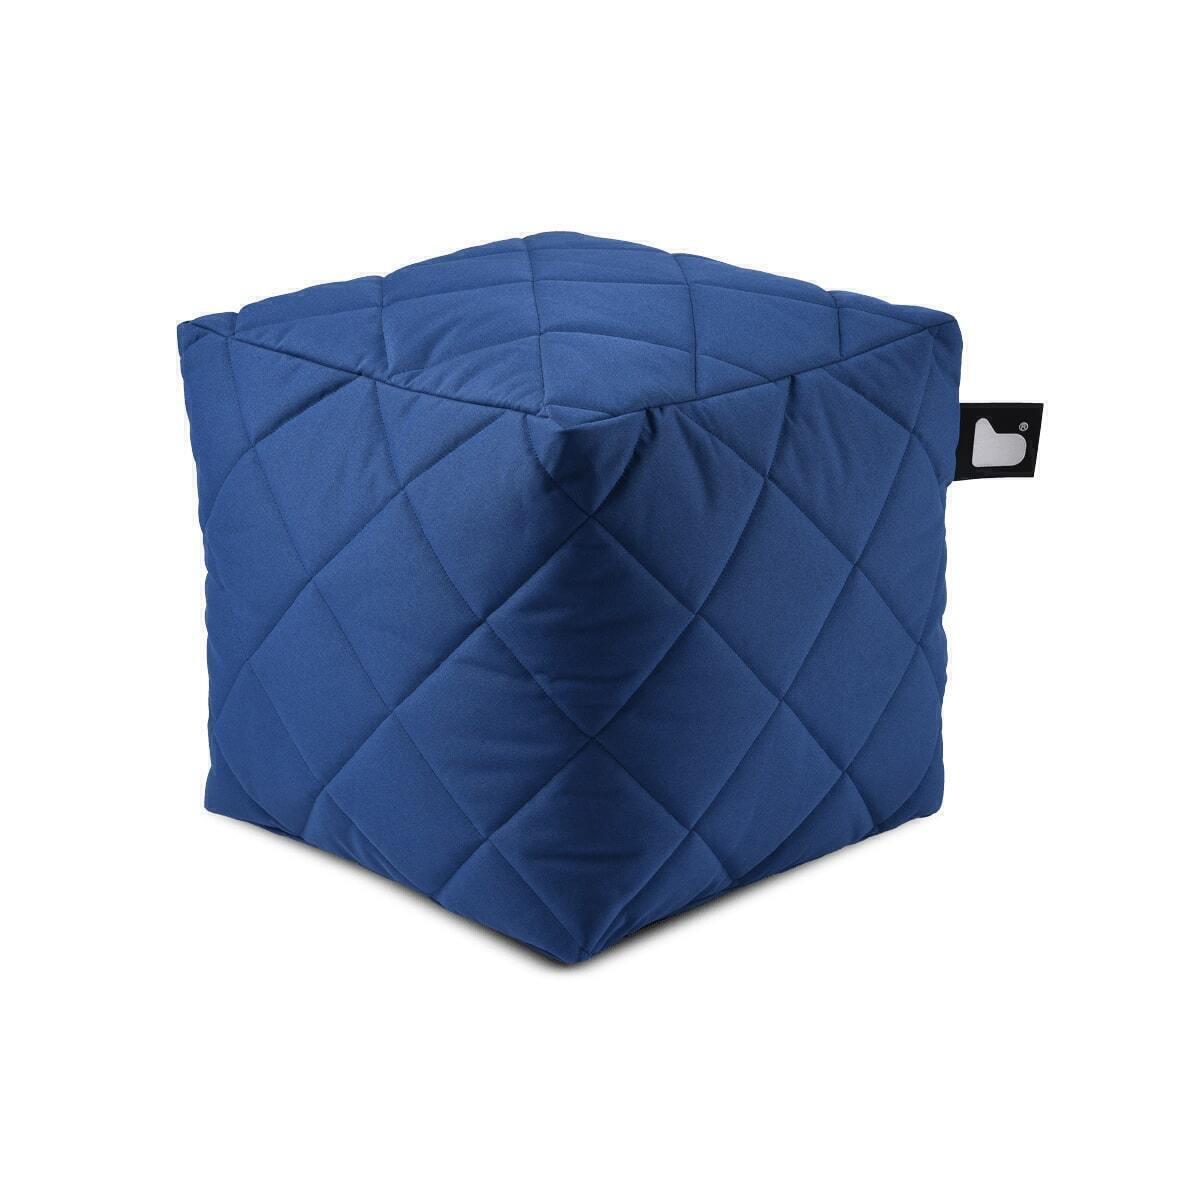 Extreme Lounging - Quilted Bean Box  - Royal product image